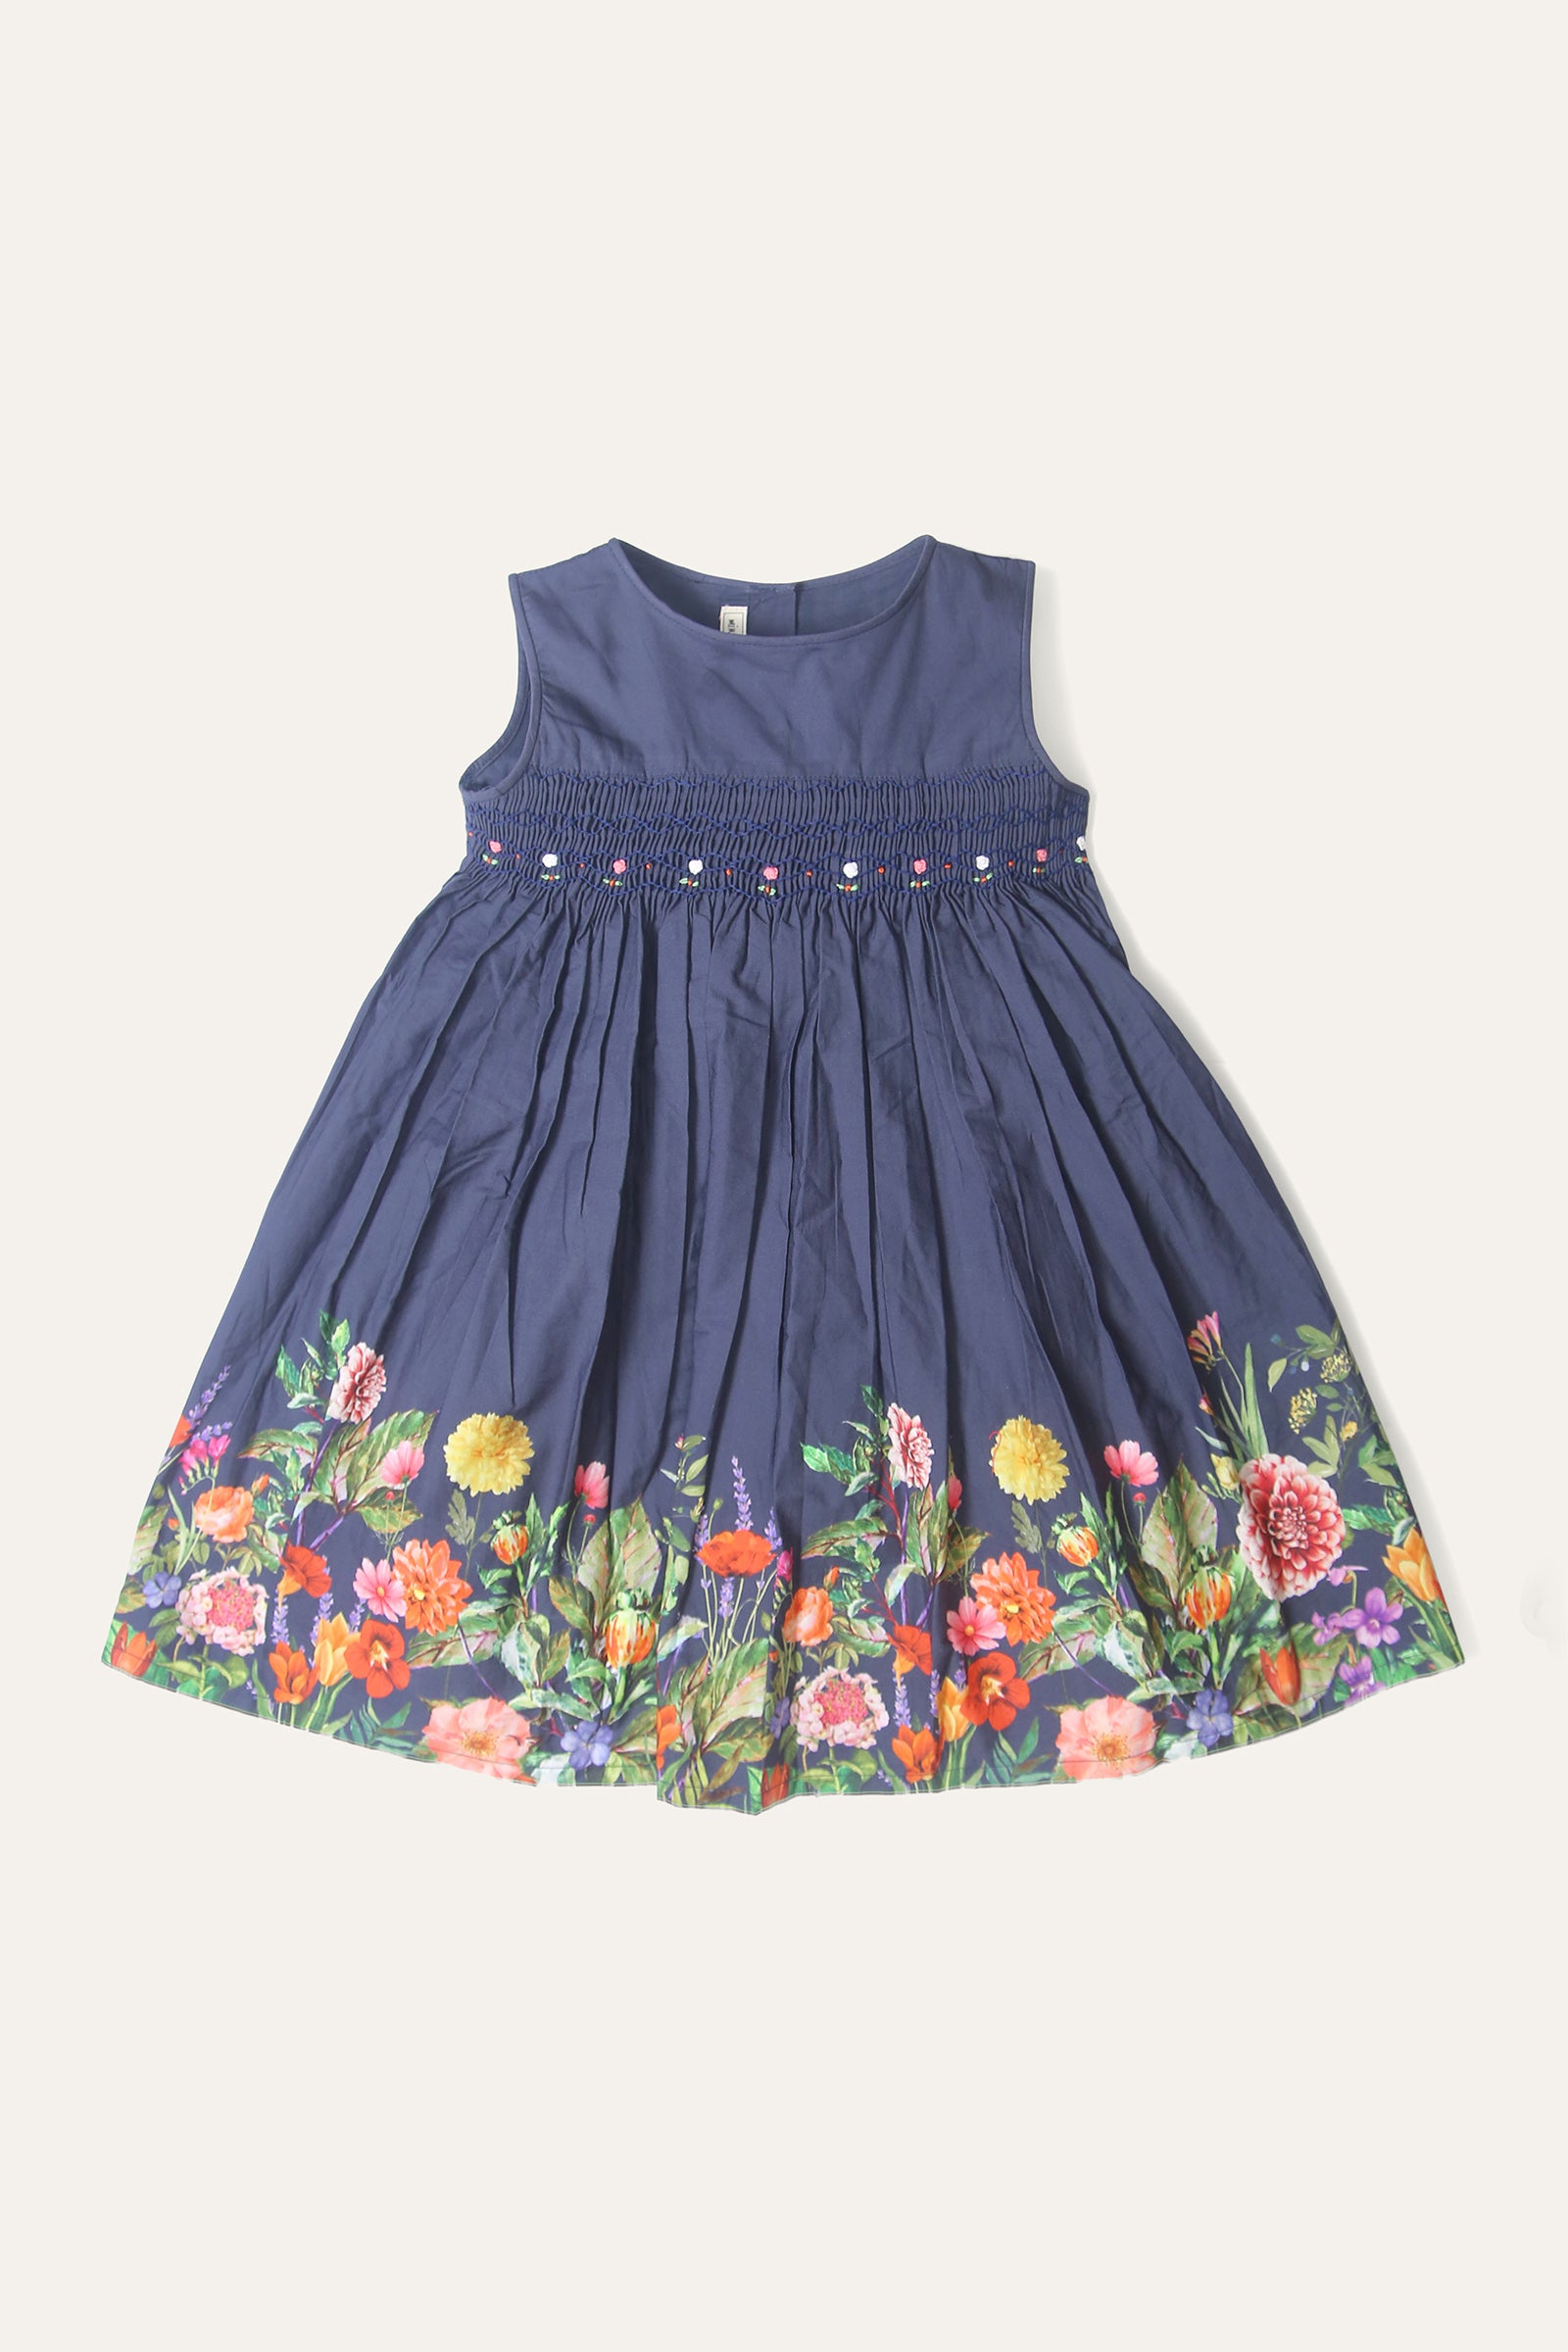 Smocked frock (SF-133R)